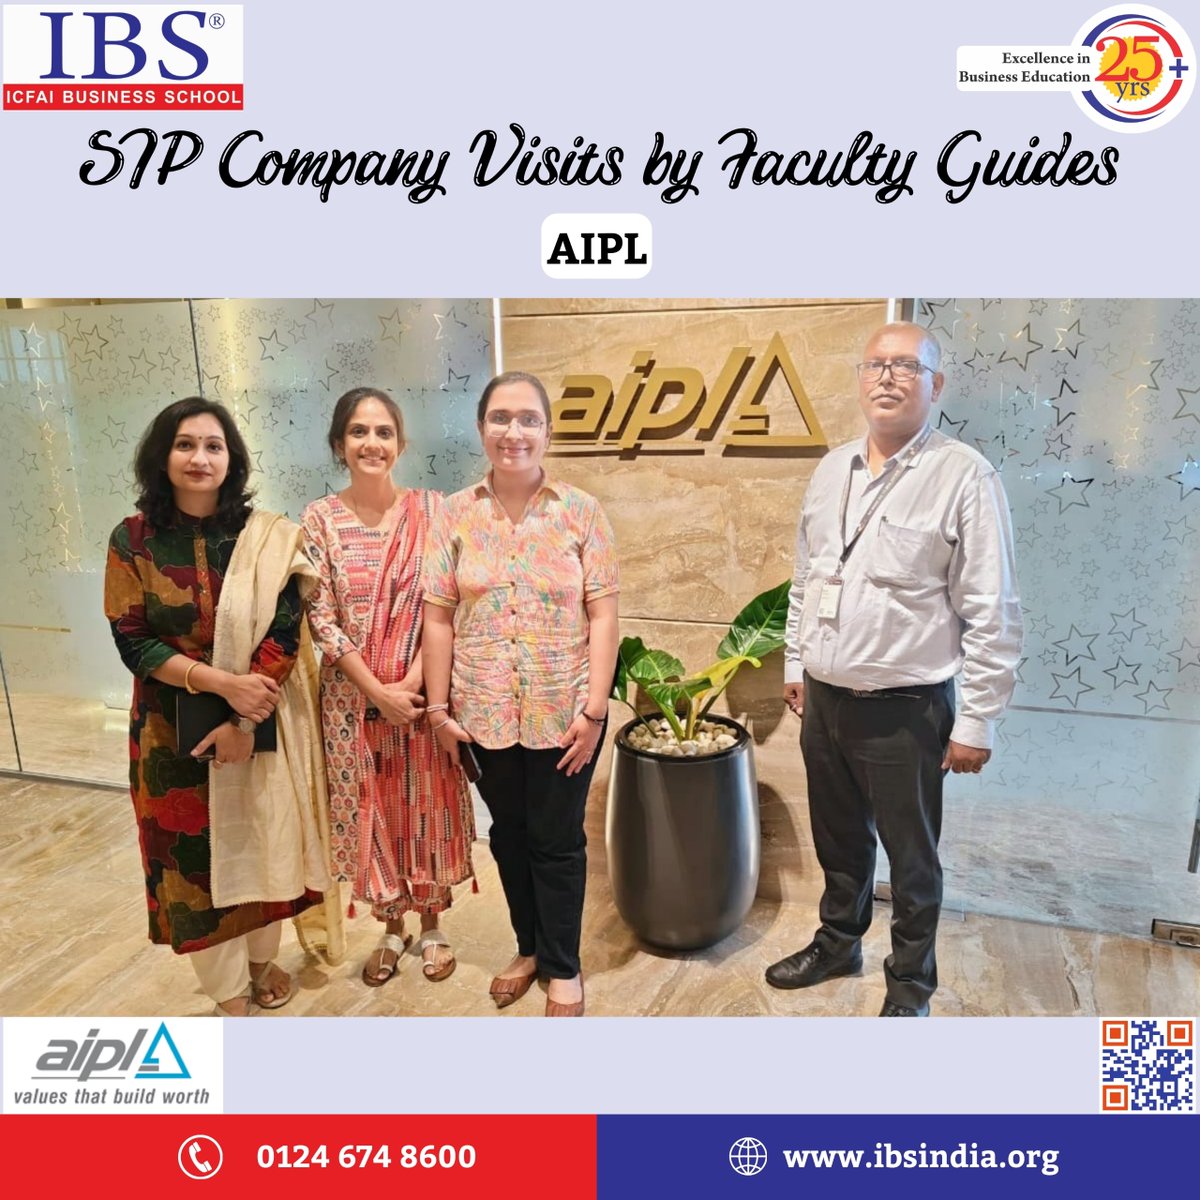 Even though the internship period is about to end, the efforts of #IBSGurgaon's faculty are consistent as Dr Reenu Kalani and Prof. Sweta Agarwal make a meaningful visit to AIPL to inspire and empower students during their summer internships. 

#Internship #SummerInternship